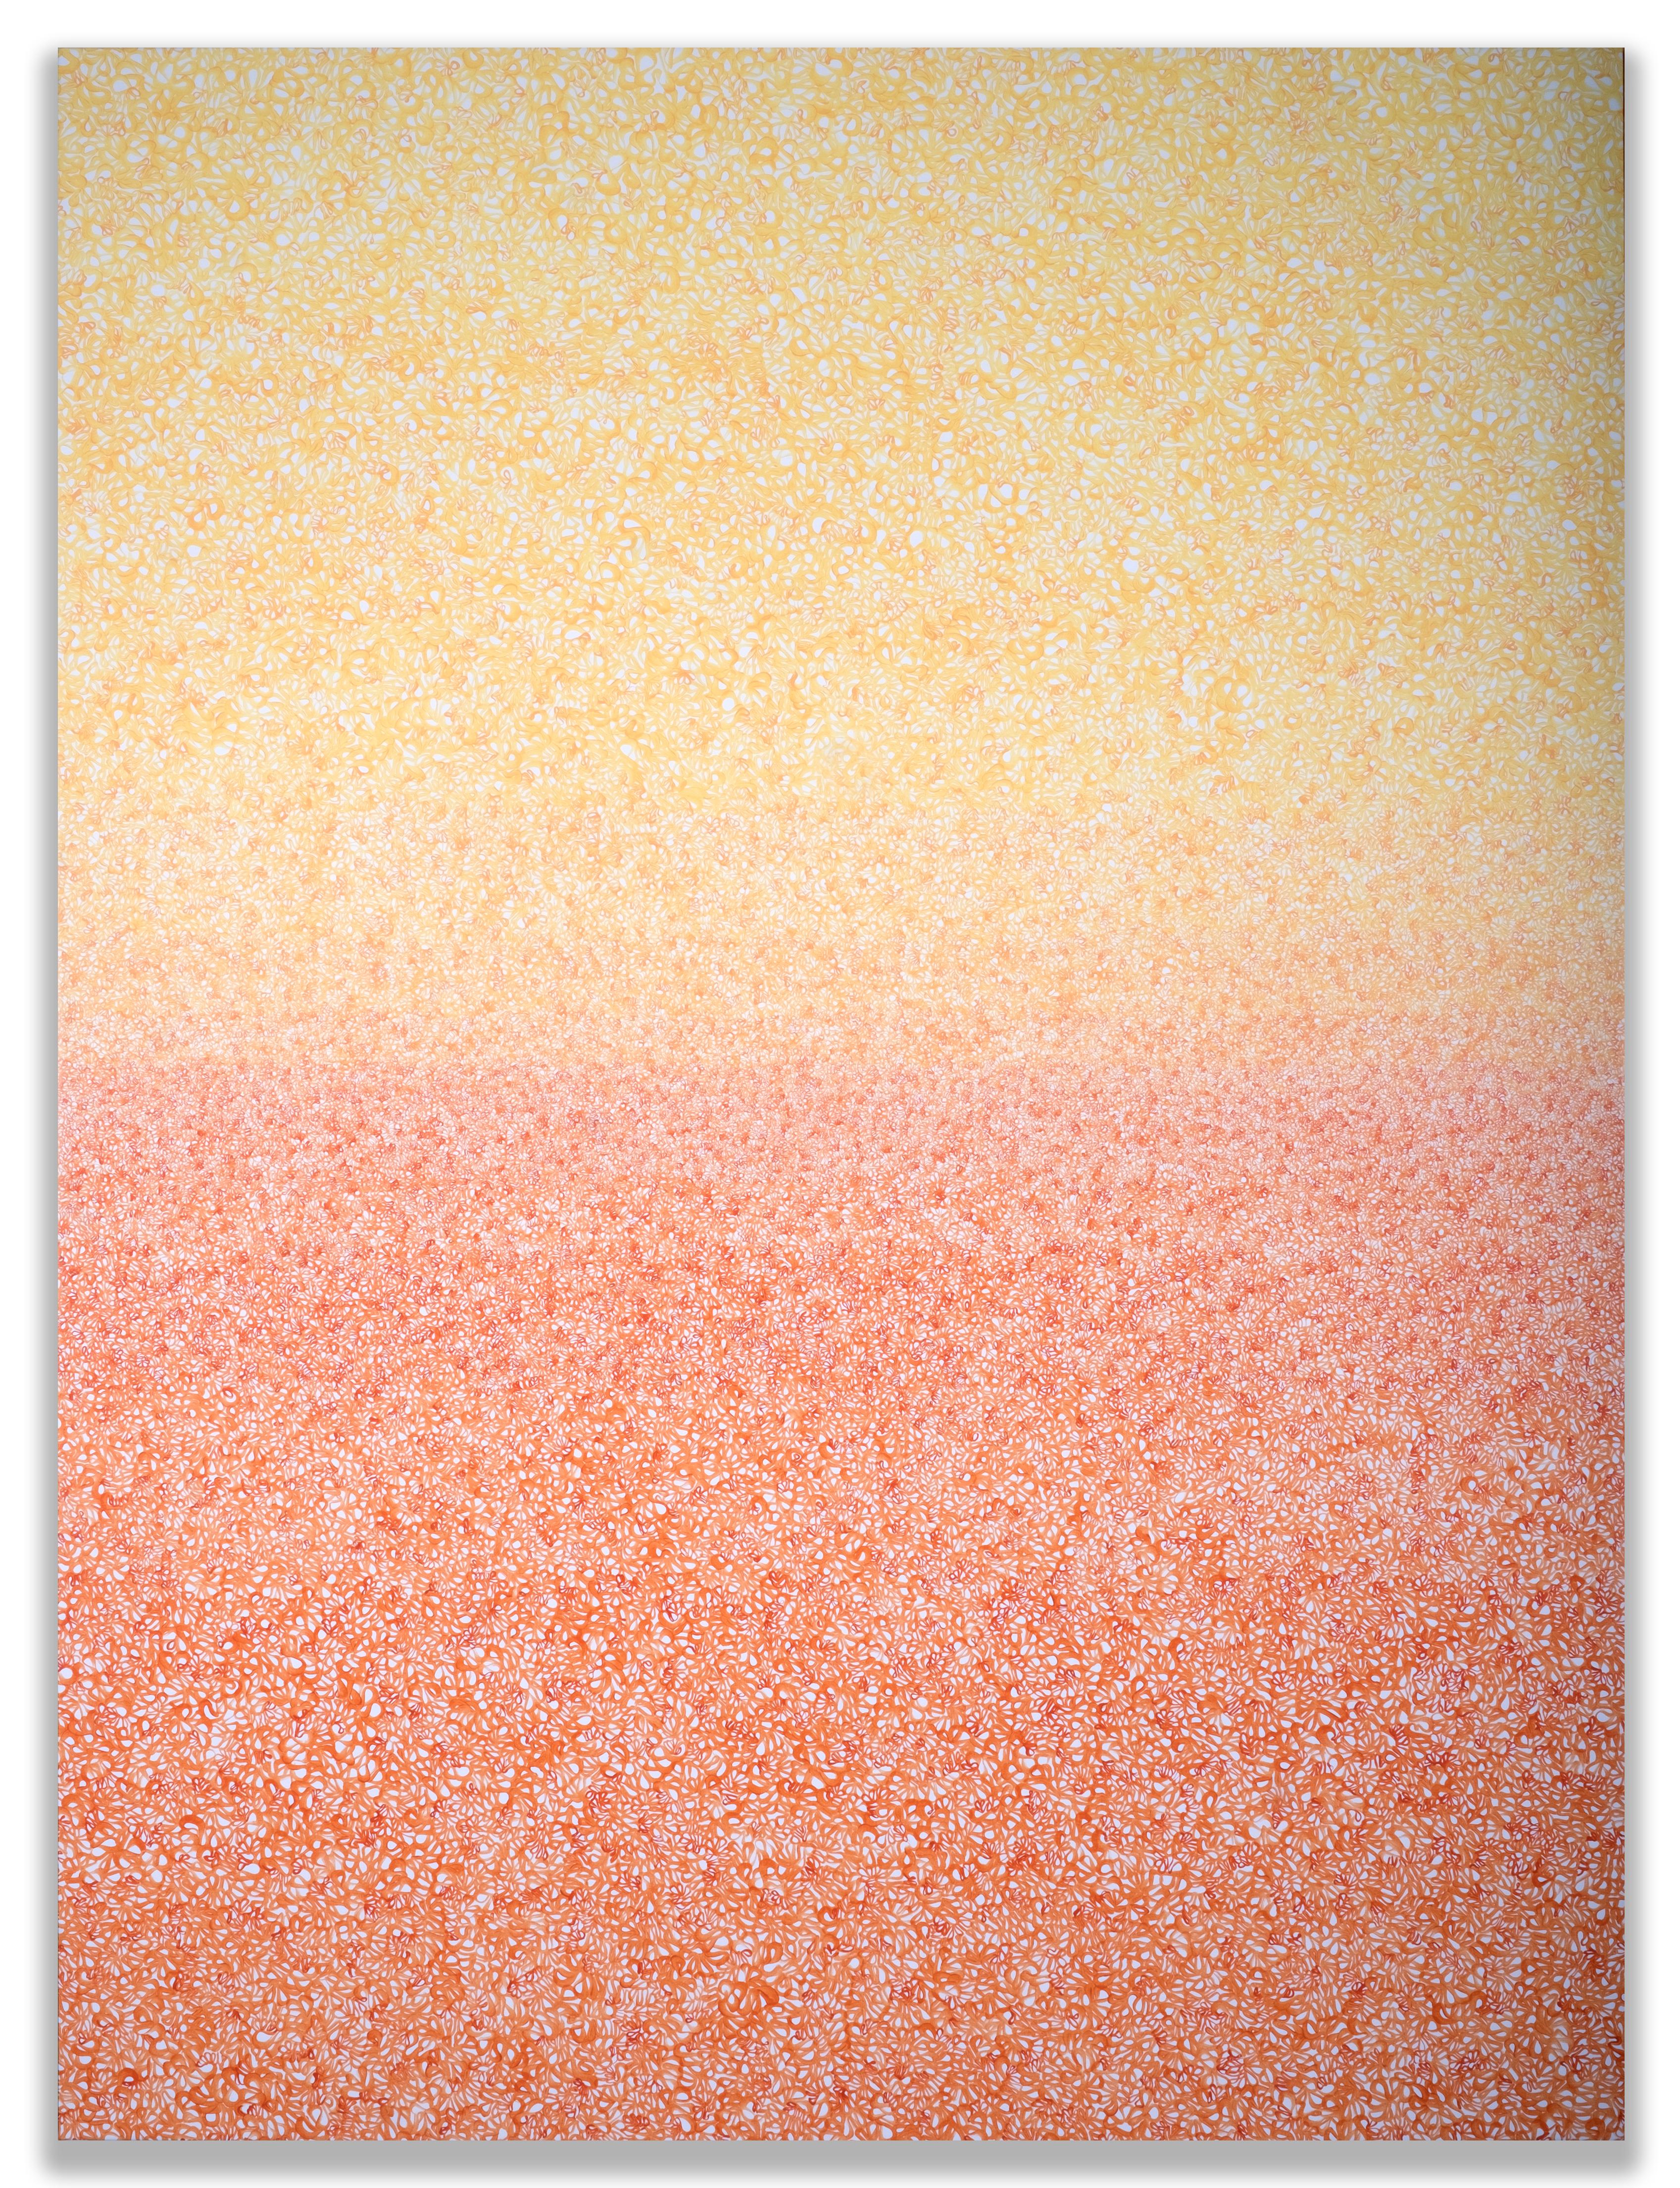 Kelsey Brookes Abstract Painting - A Line Through the Rainbow (Yellow to Orange)